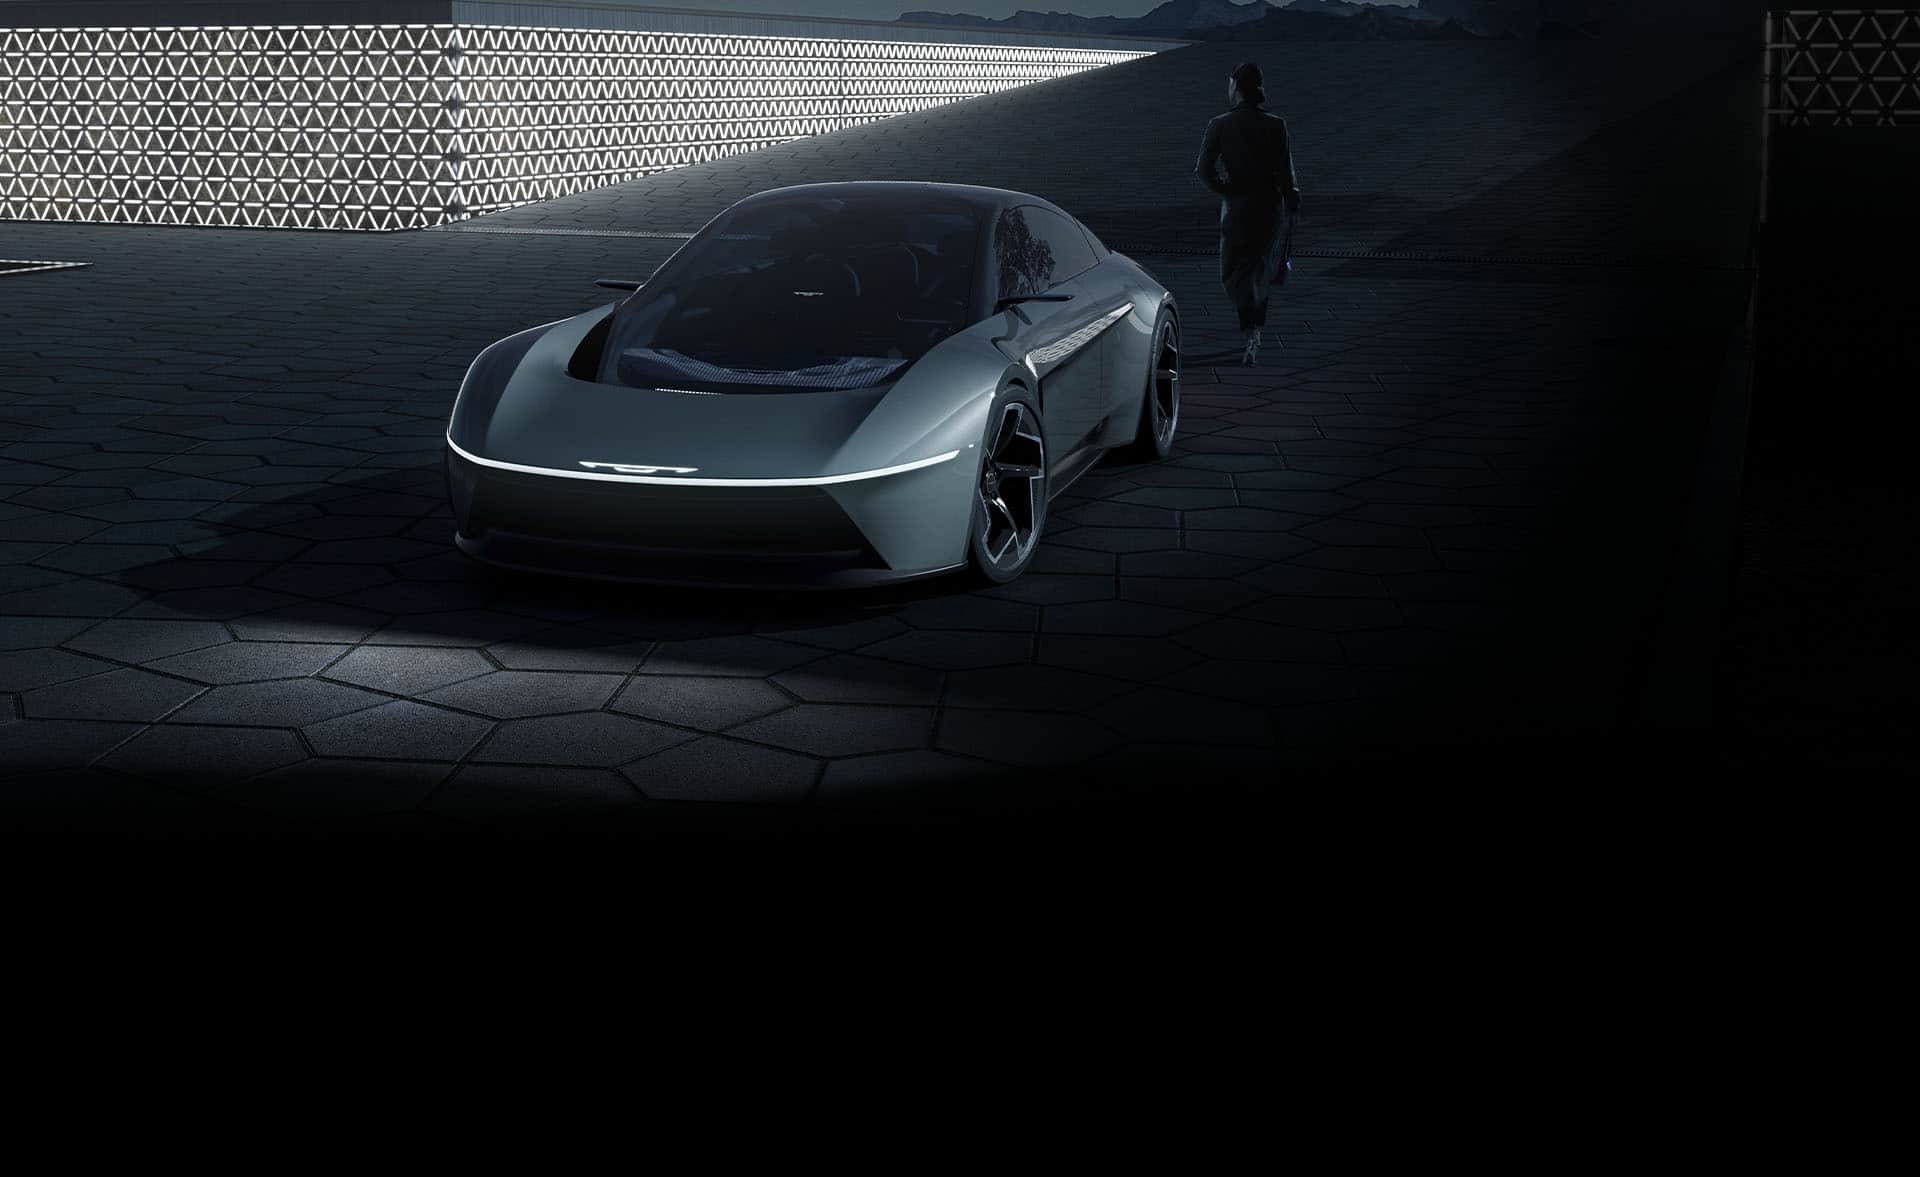 A raised front angle of a gray Chrysler Halcyon Concept vehicle parked in a darkened courtyard.